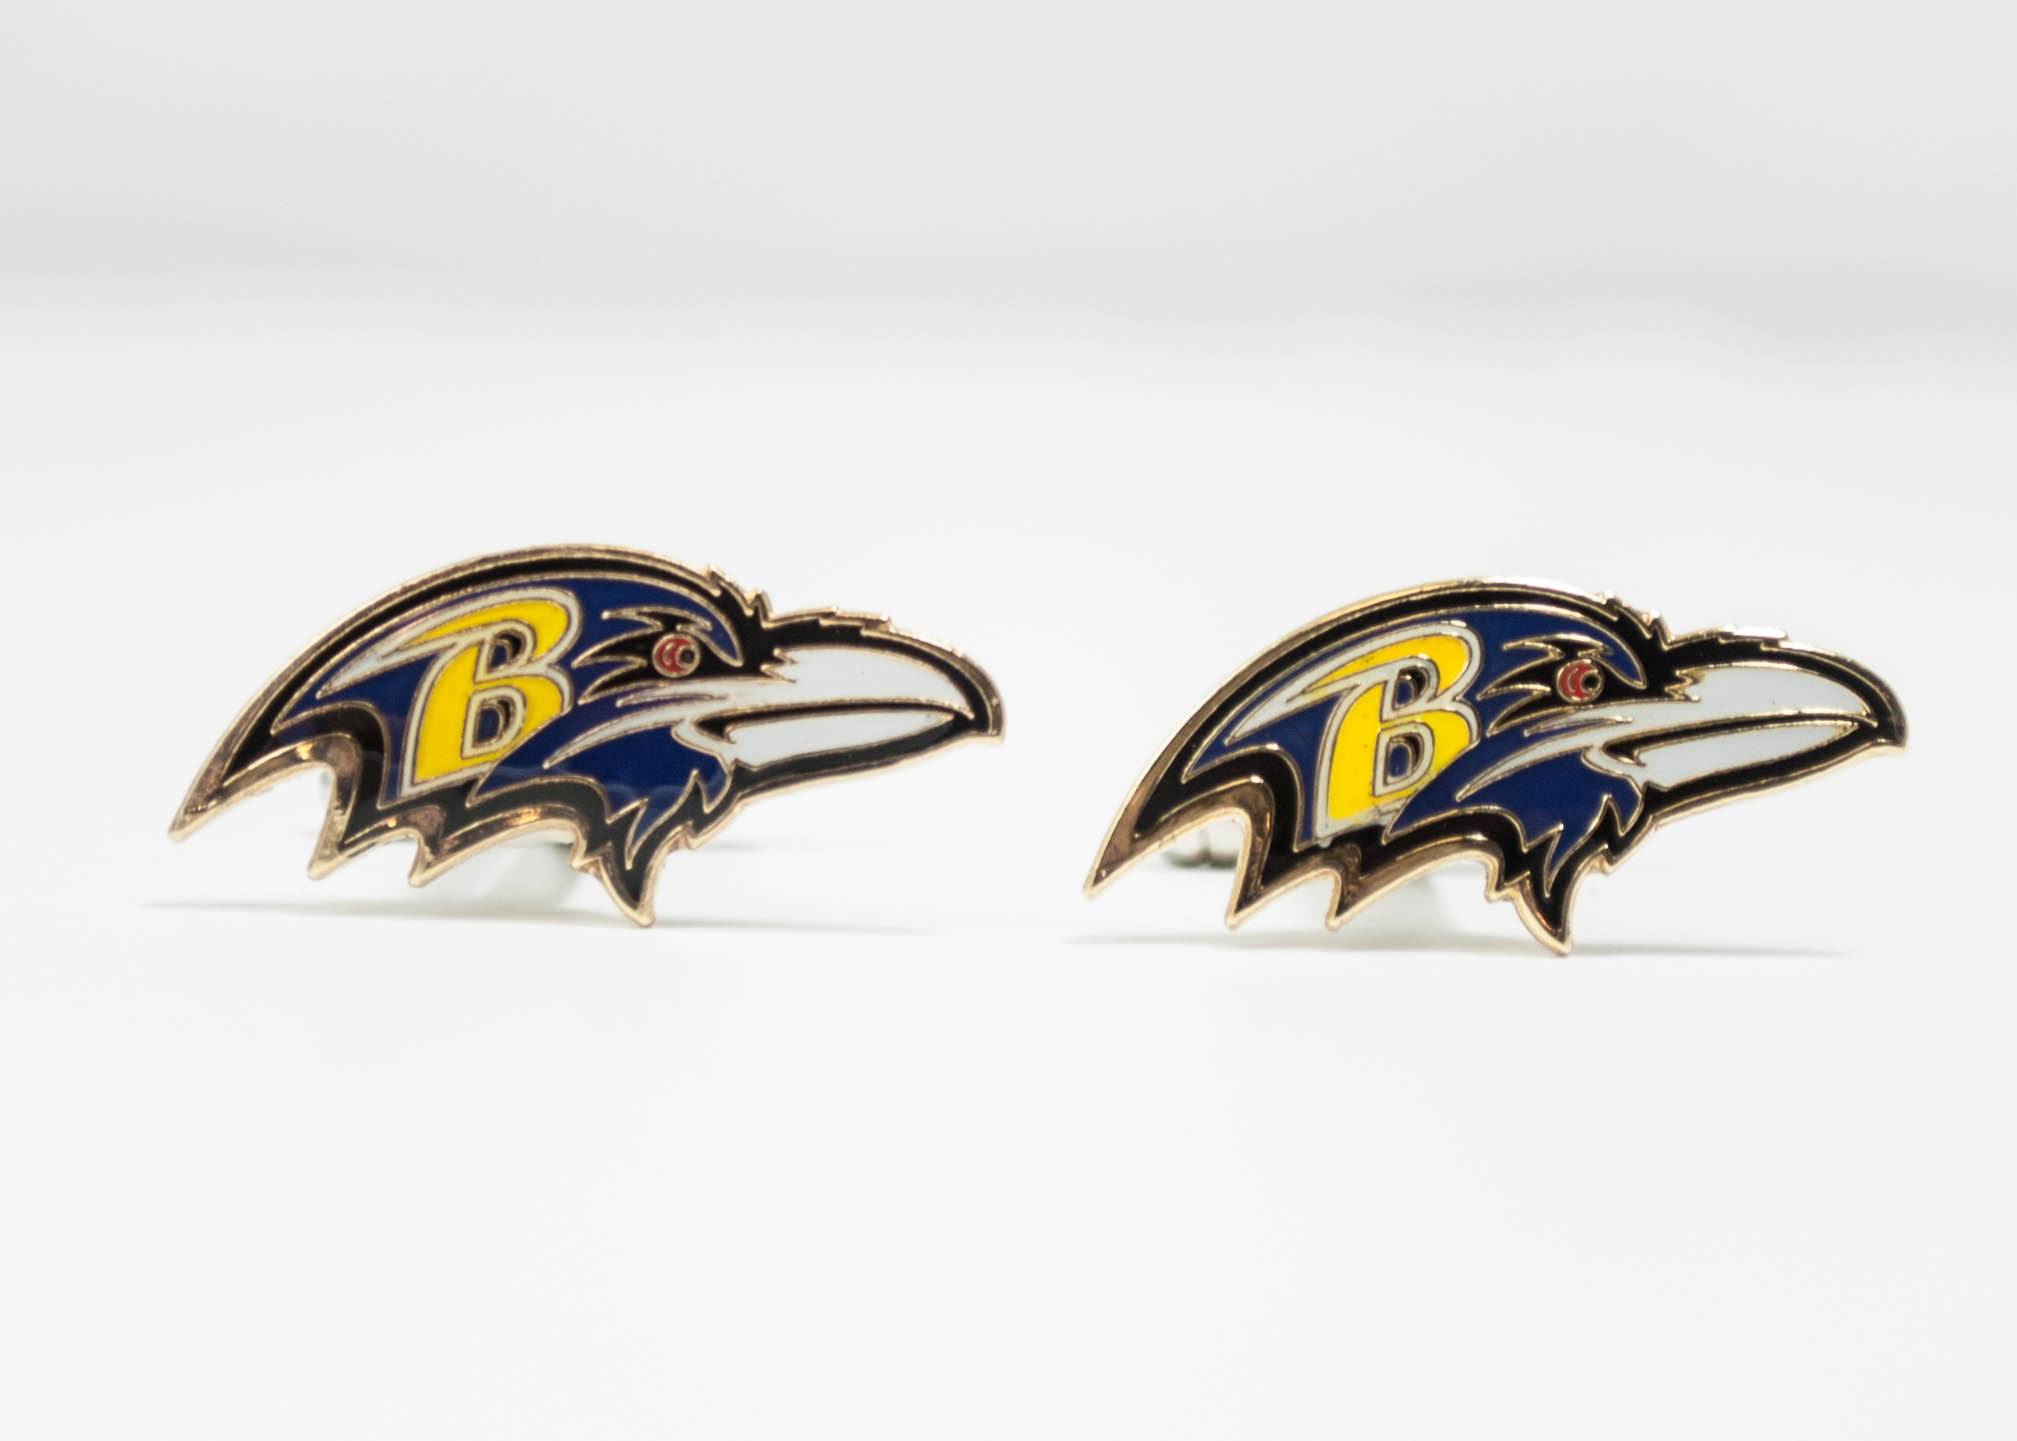 Lapel Pins In Baltimore Maryland